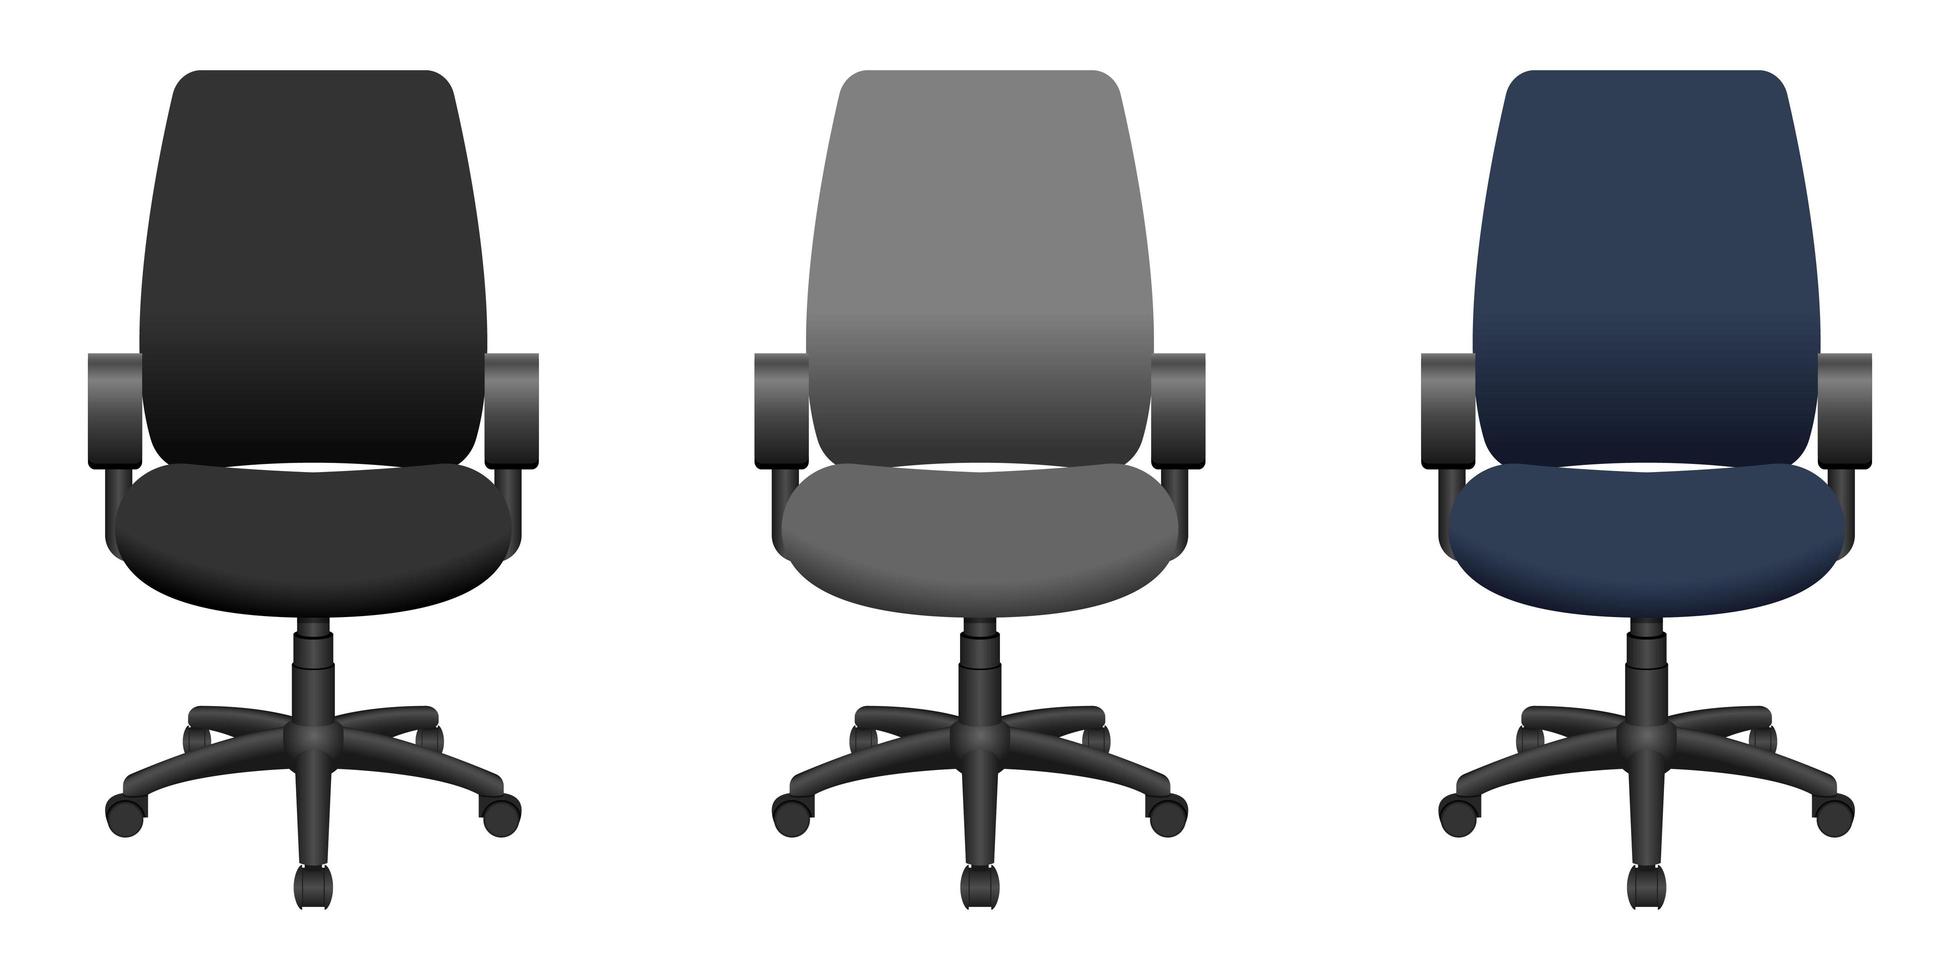 Office chair vector design illustration isolated on white background